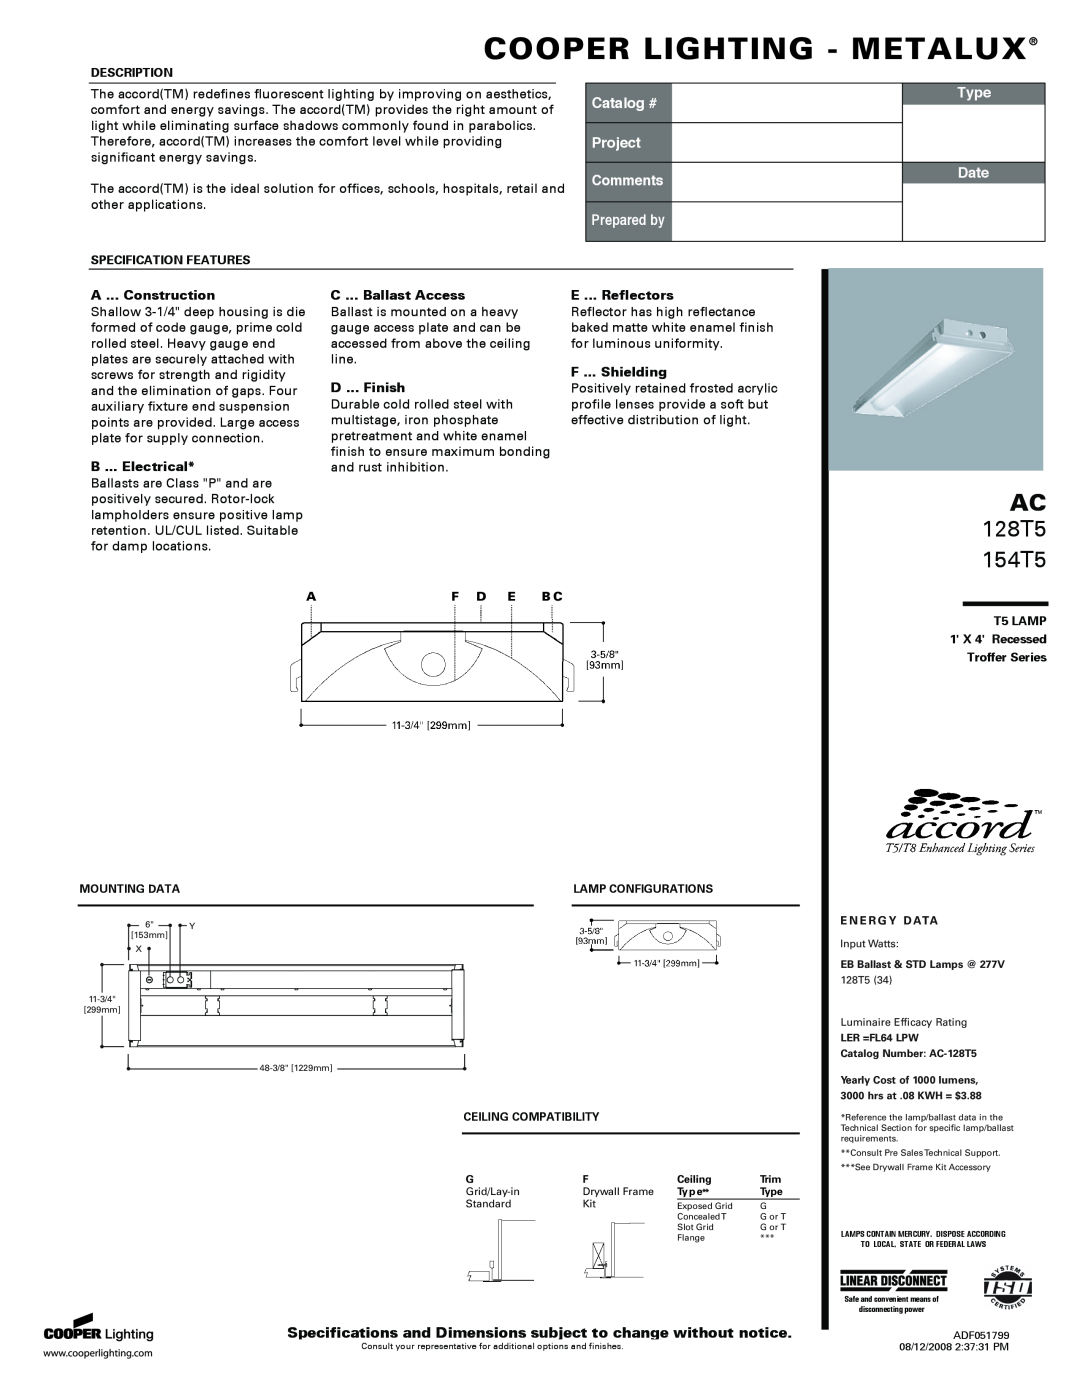 Cooper Lighting AC154T5 specifications Cooper Lighting - Metalux, 128T5 154T5, Catalog #, Project Comments, Prepared by 